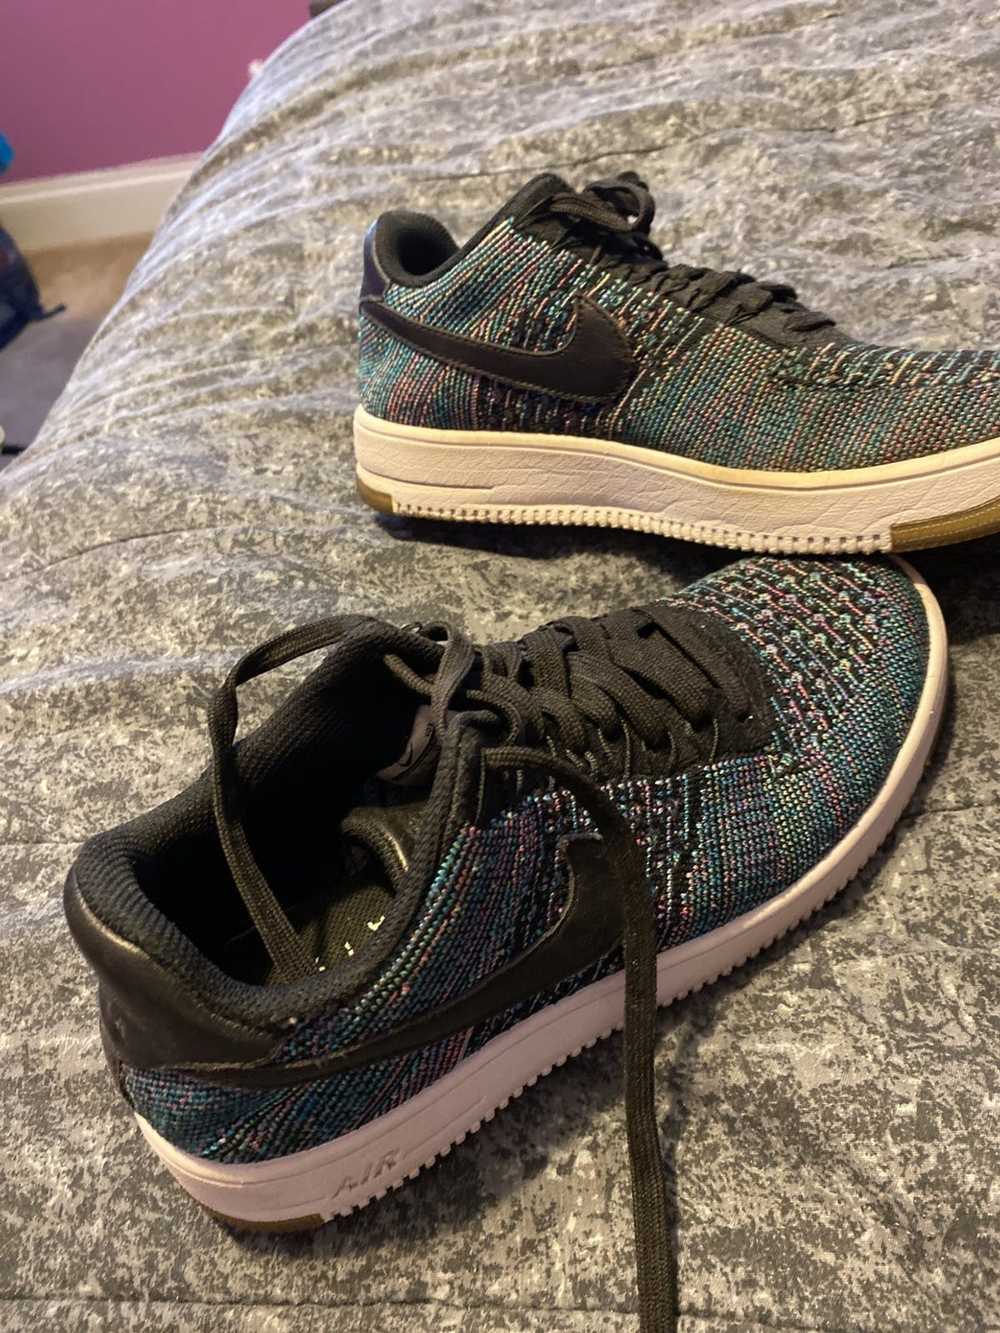 Nike × Us Air Force nike air force 1 flyknit - image 1